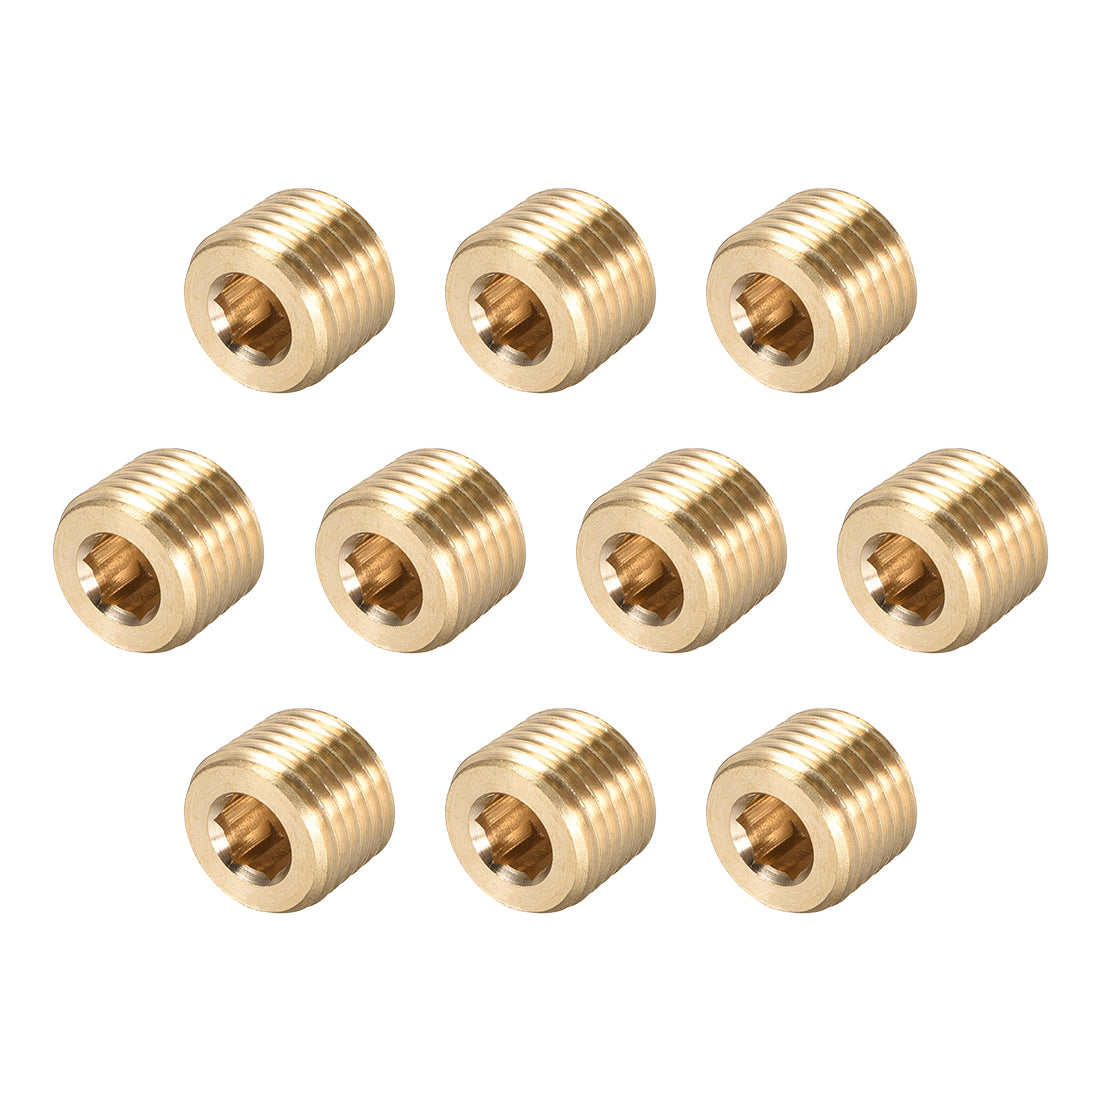 Uxcell Uxcell Brass Pipe Fitting - Hex Counter Sunk Plug 1/16NPT Male Socket Drive Countersunk Pipe Plugs 10pcs